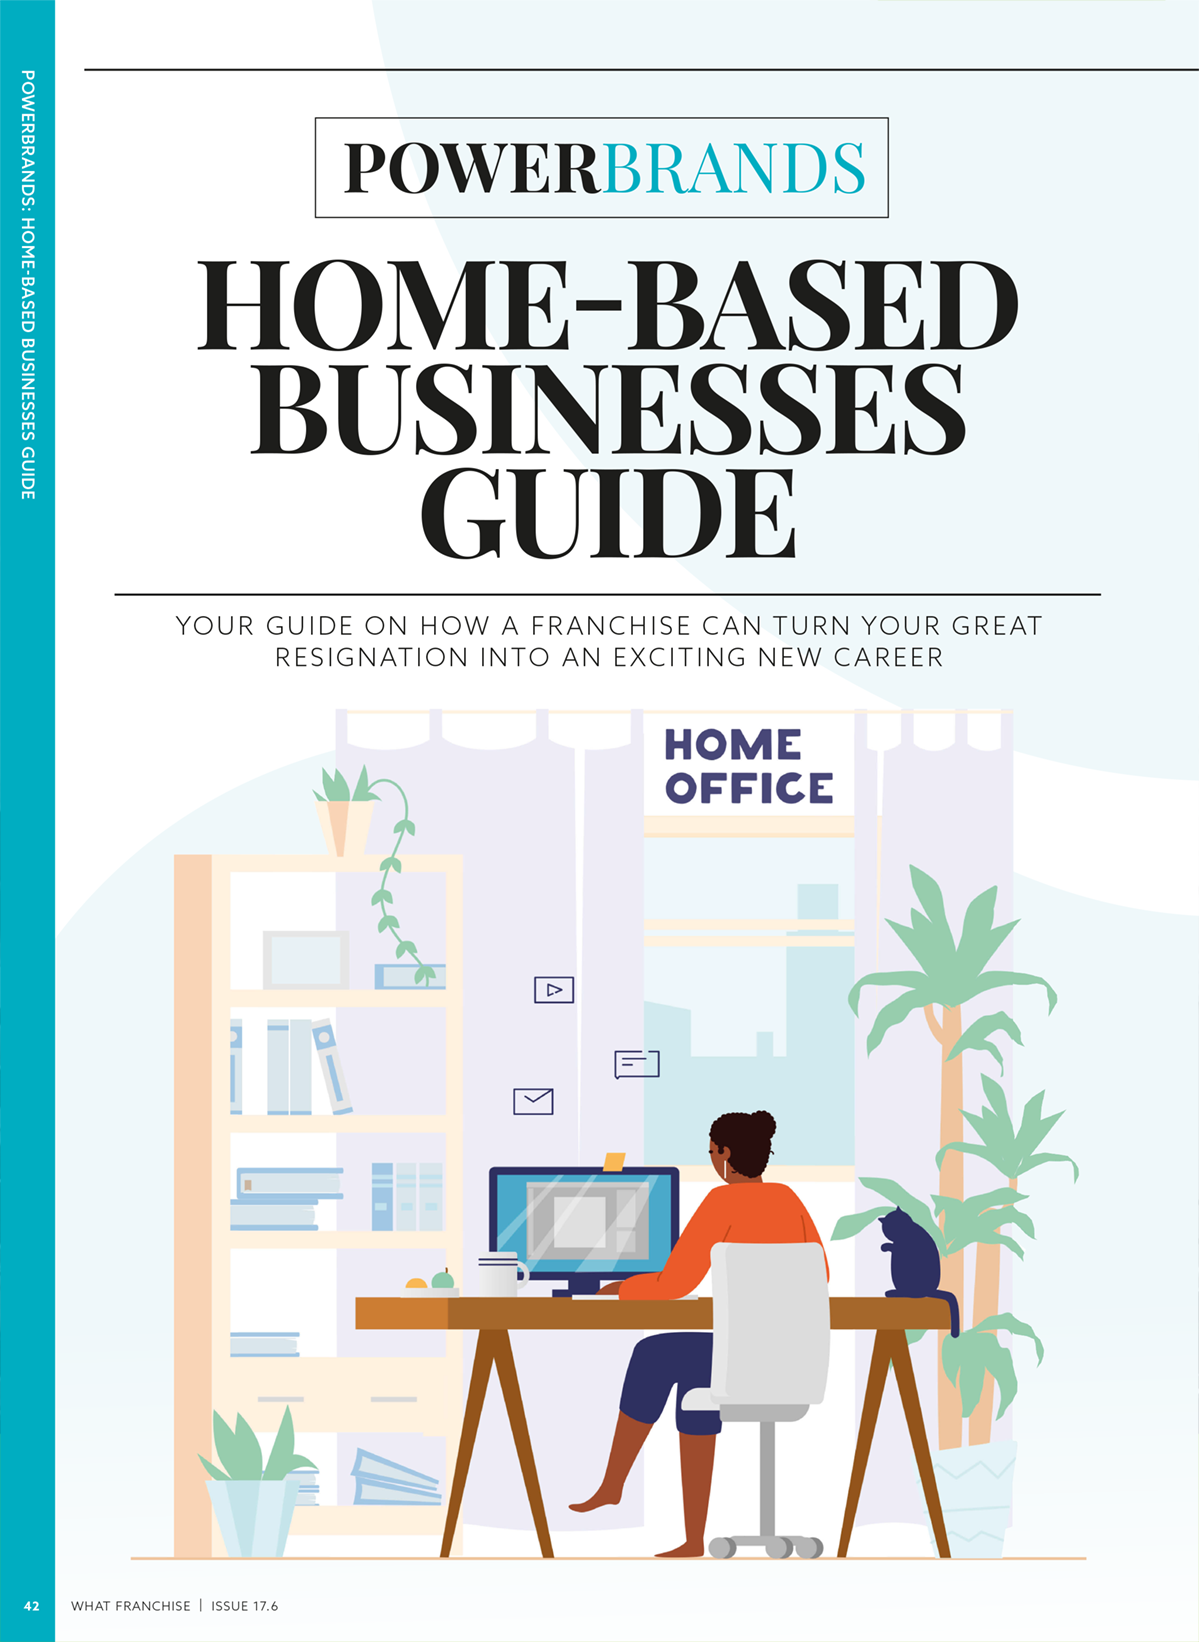 Powerbrands: Home-Based Businesses Guide